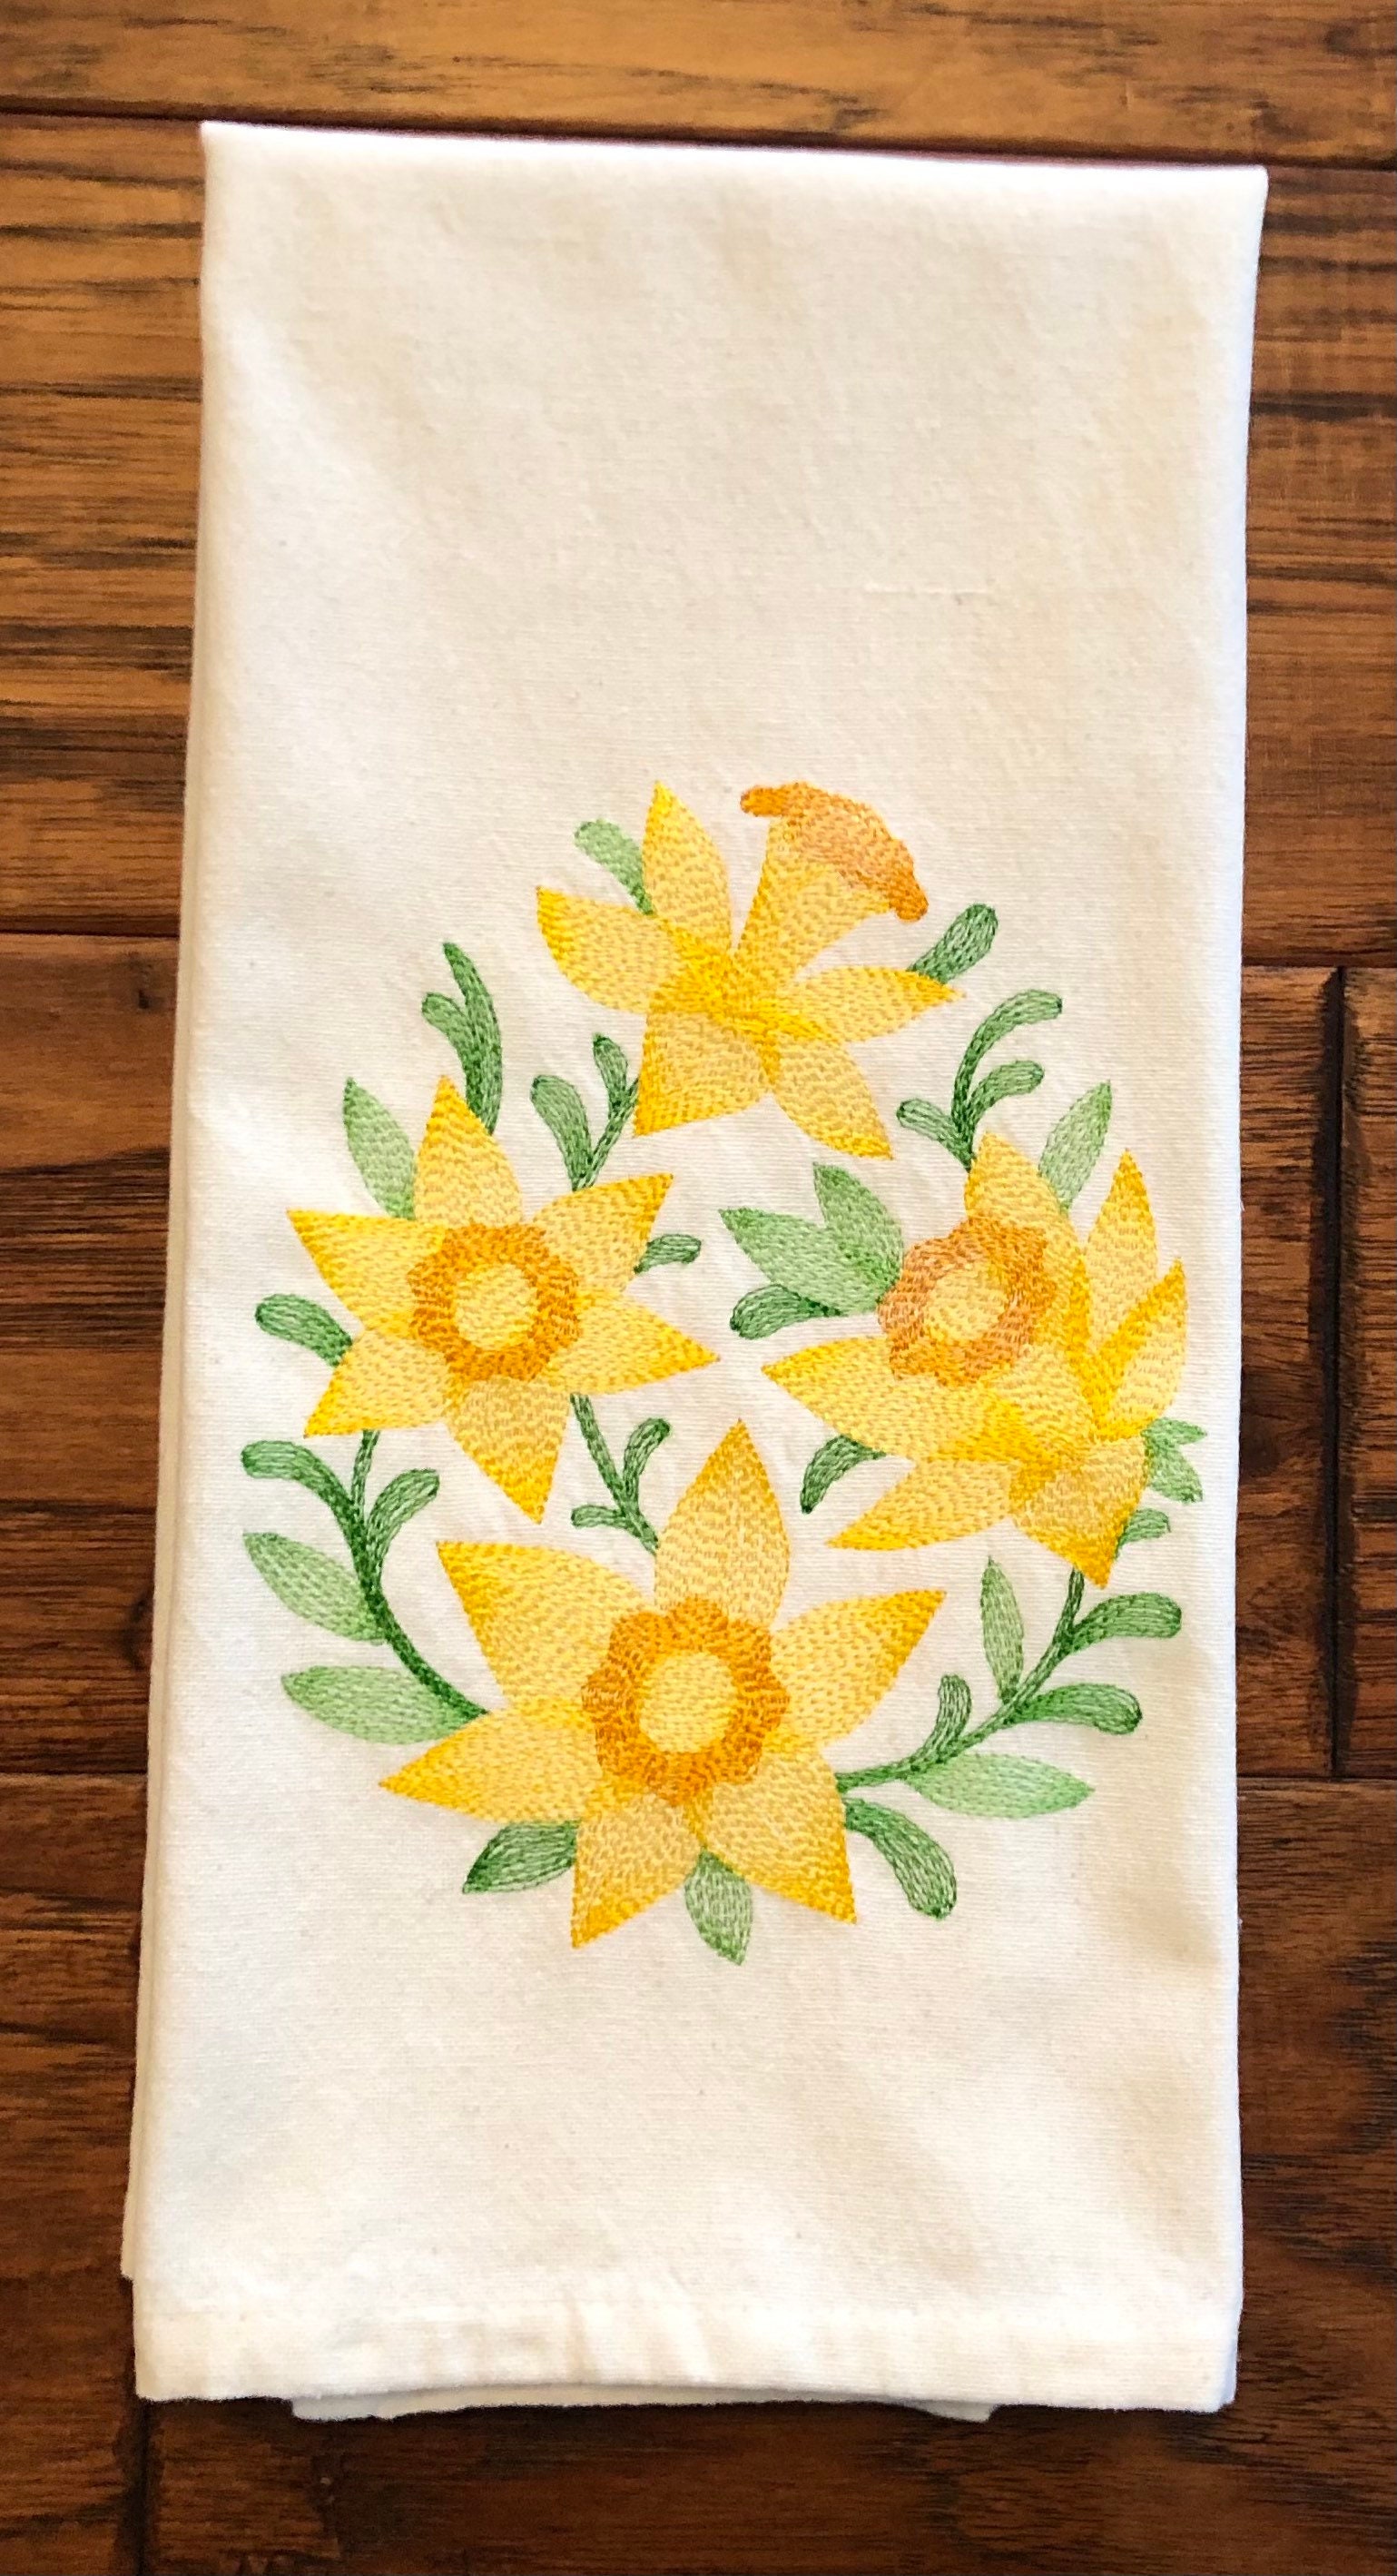 GEEORY Spring White Daisy Kitchen Dish Towels 18x26 Inch Ultra Absorbent  Bar Drying Cloth Hello Spring Hand TowelHome Decor Set of 2 GD001